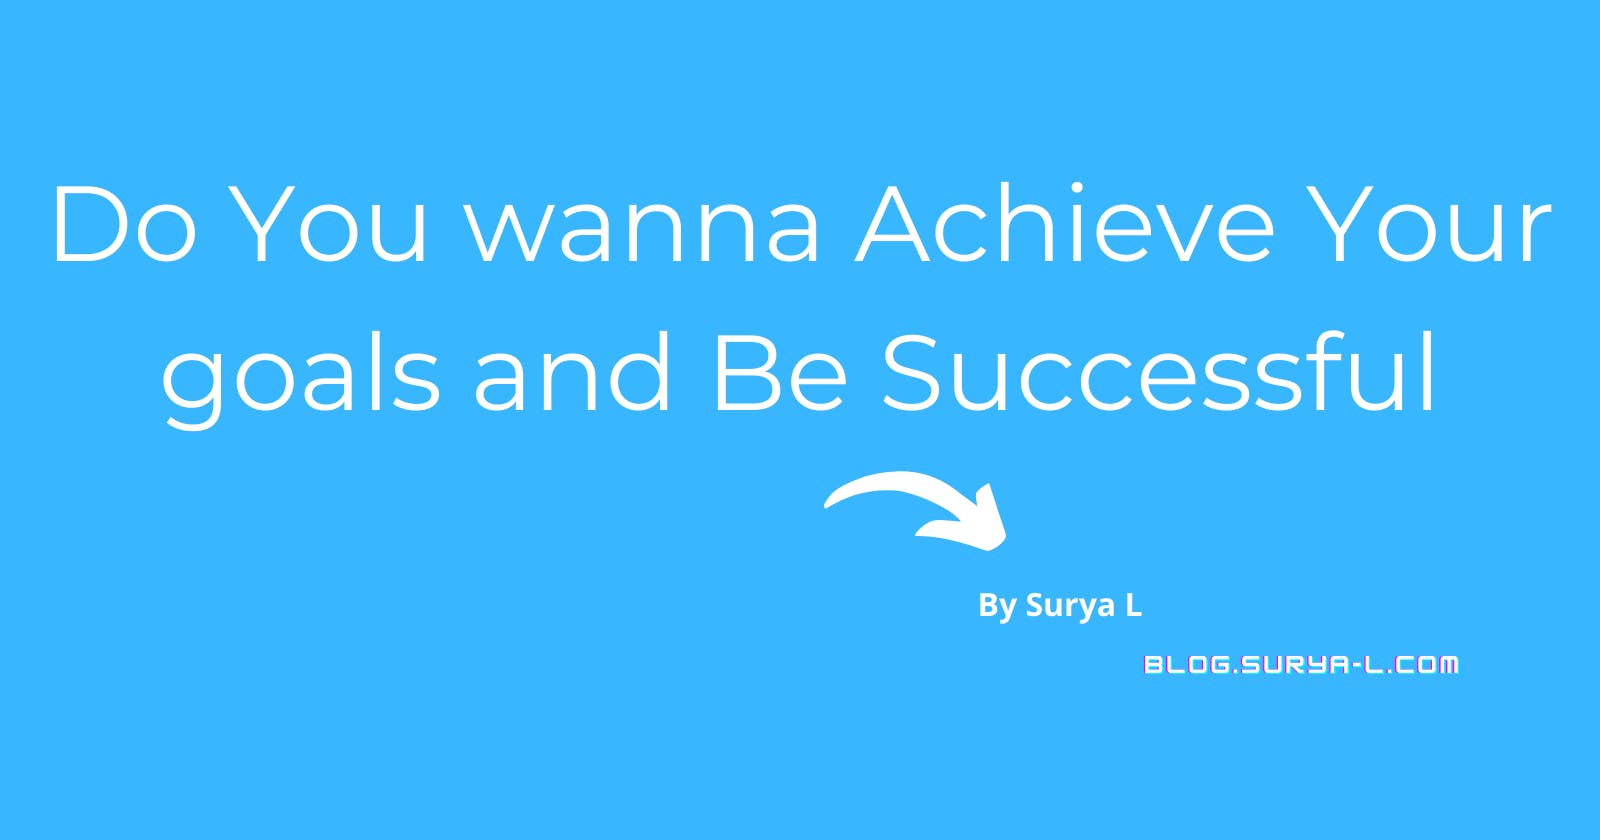 How can you focus on your goals to achieve success?